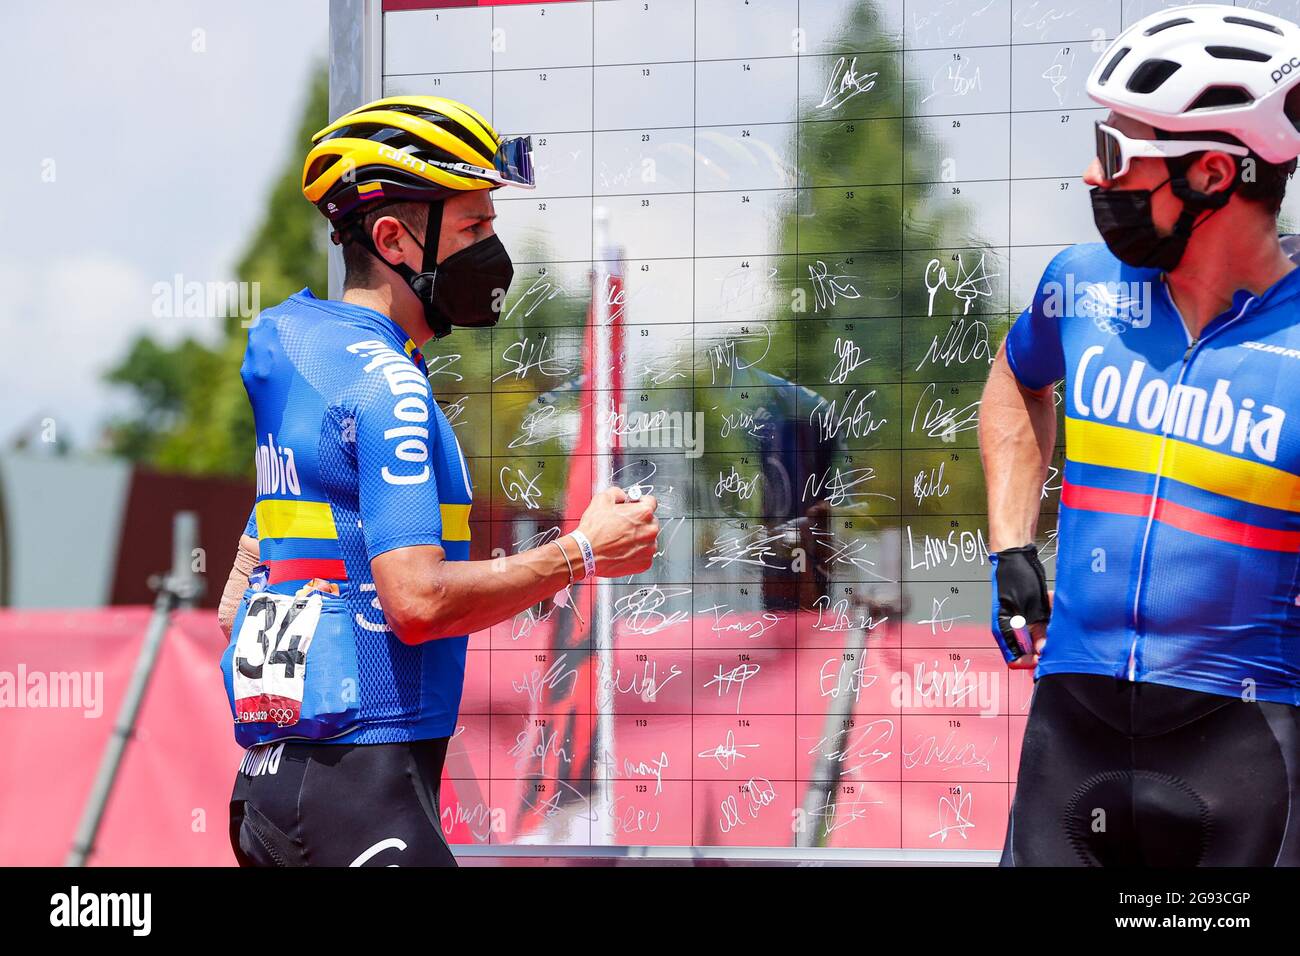 Tokyo, Japan. 24th July, 2021. TOKYO, JAPAN - JULY 24: Jhoan Esteban Chaves Rubio of Colombia and Rigoberto Uran of Colombia competing on Men's Road Race during the Tokyo 2020 Olympic Games at the Fuji International Speedway on July 24, 2021 in Tokyo, Japan (Photo by Pim Waslander/Orange Pictures) NOCNSF Credit: Orange Pics BV/Alamy Live News Stock Photo